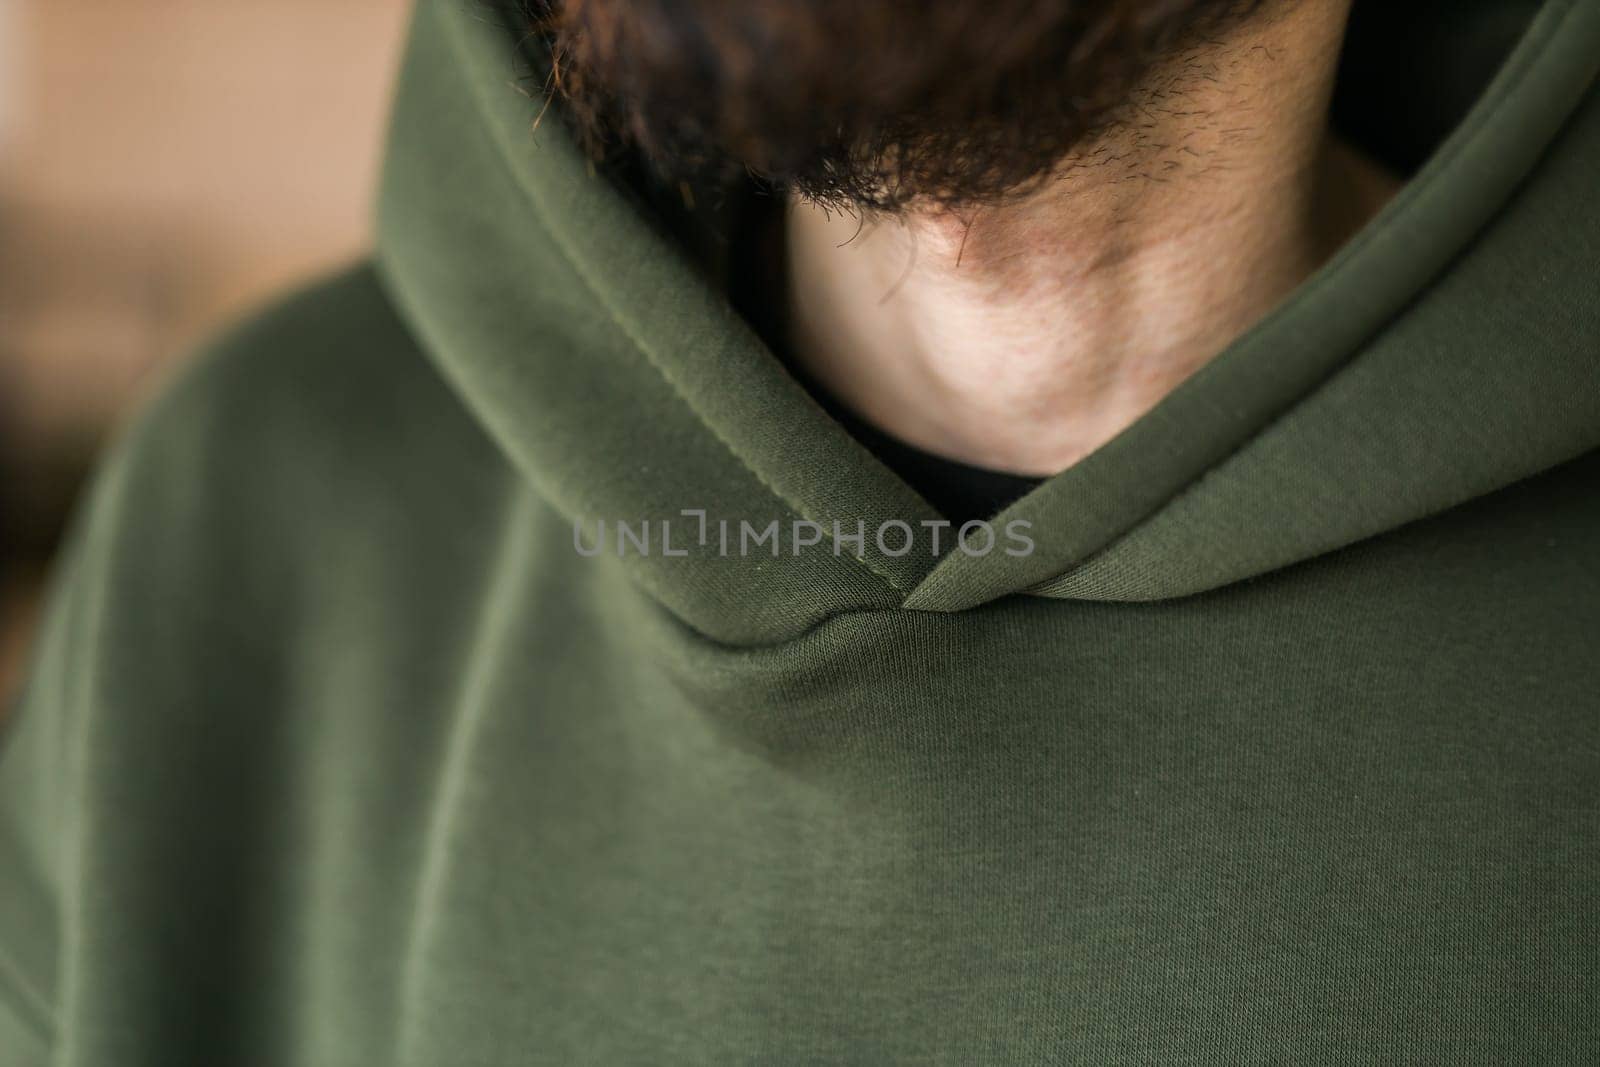 Close-up of cotton sweatshirt fabric texture clothes - design clothes tailoring and youth fashion concept by Satura86